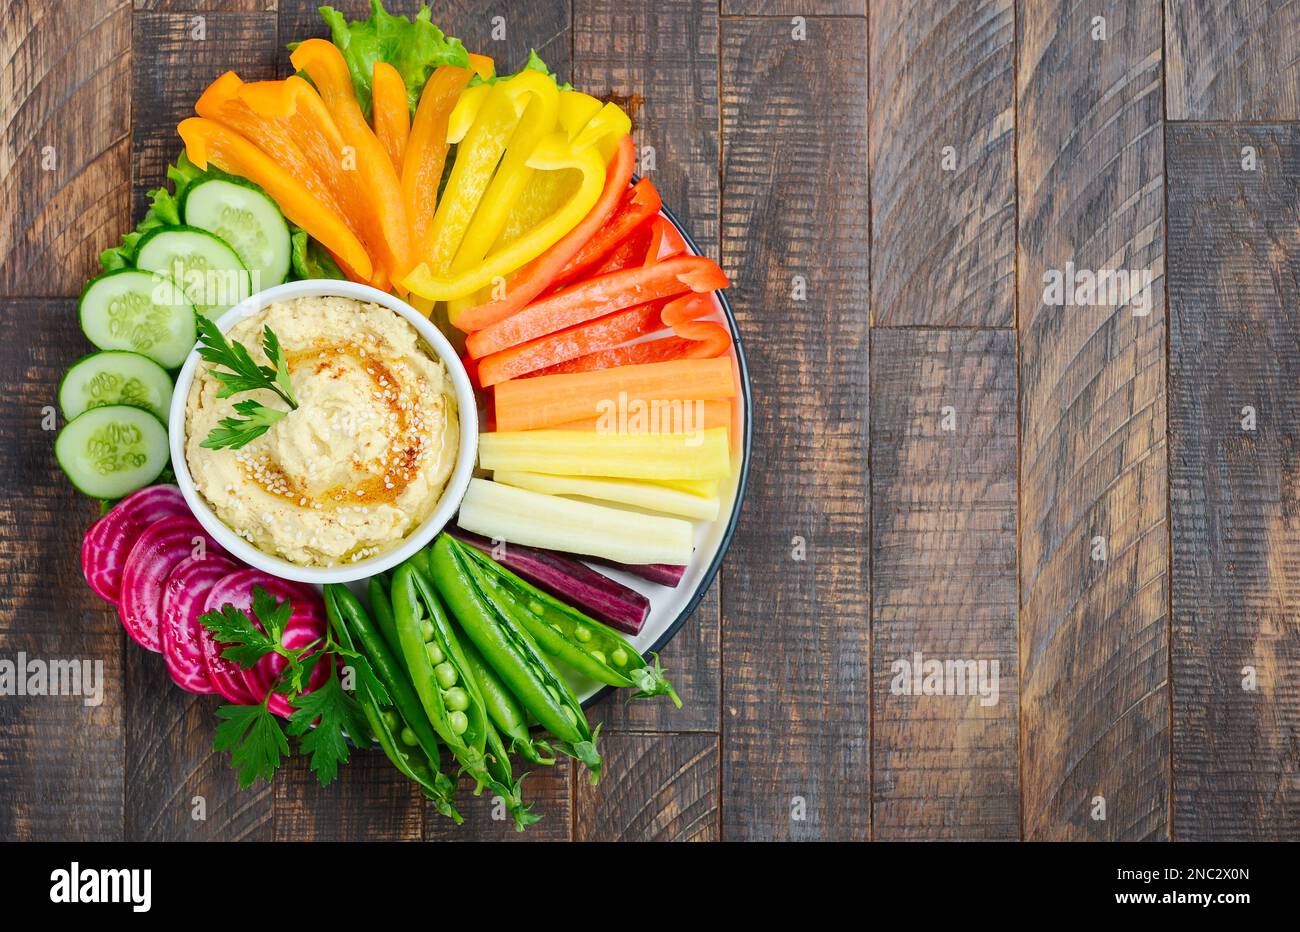 Hummus platter with assorted vegetable snacks. Healthy vegan and vegetarian food. Top view, flat lay, copy space. Stock Photo